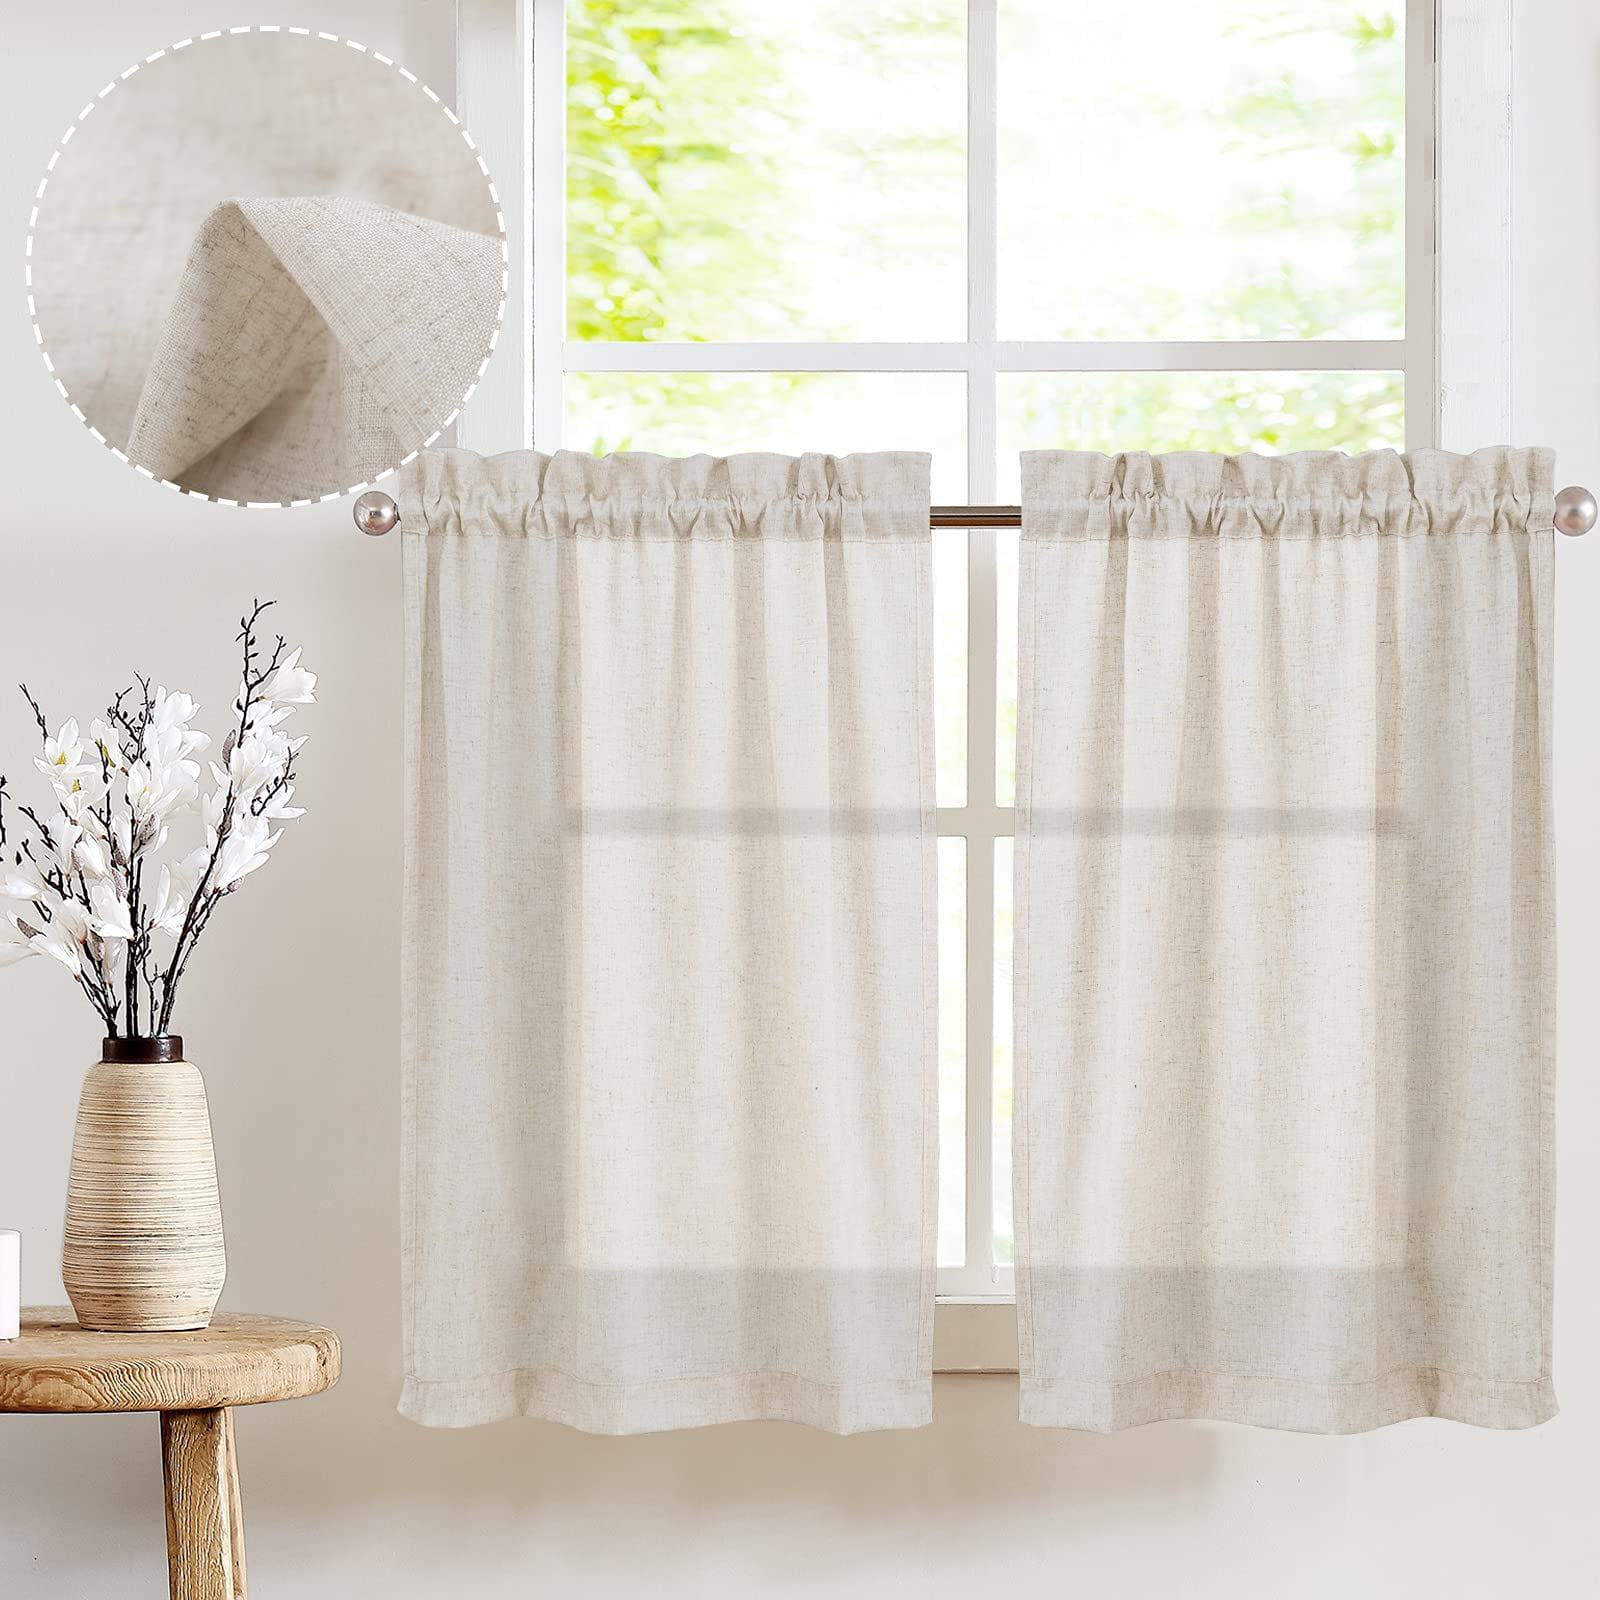 WPKIRA Kitchen Valance Short Curtains for Bath Room Solid Sheer Curtains 21 Inch Length Rod Pocket Top Window Treatment Panel for Small Window White, 1 Panel Per Package,39 Width x 21 Length 